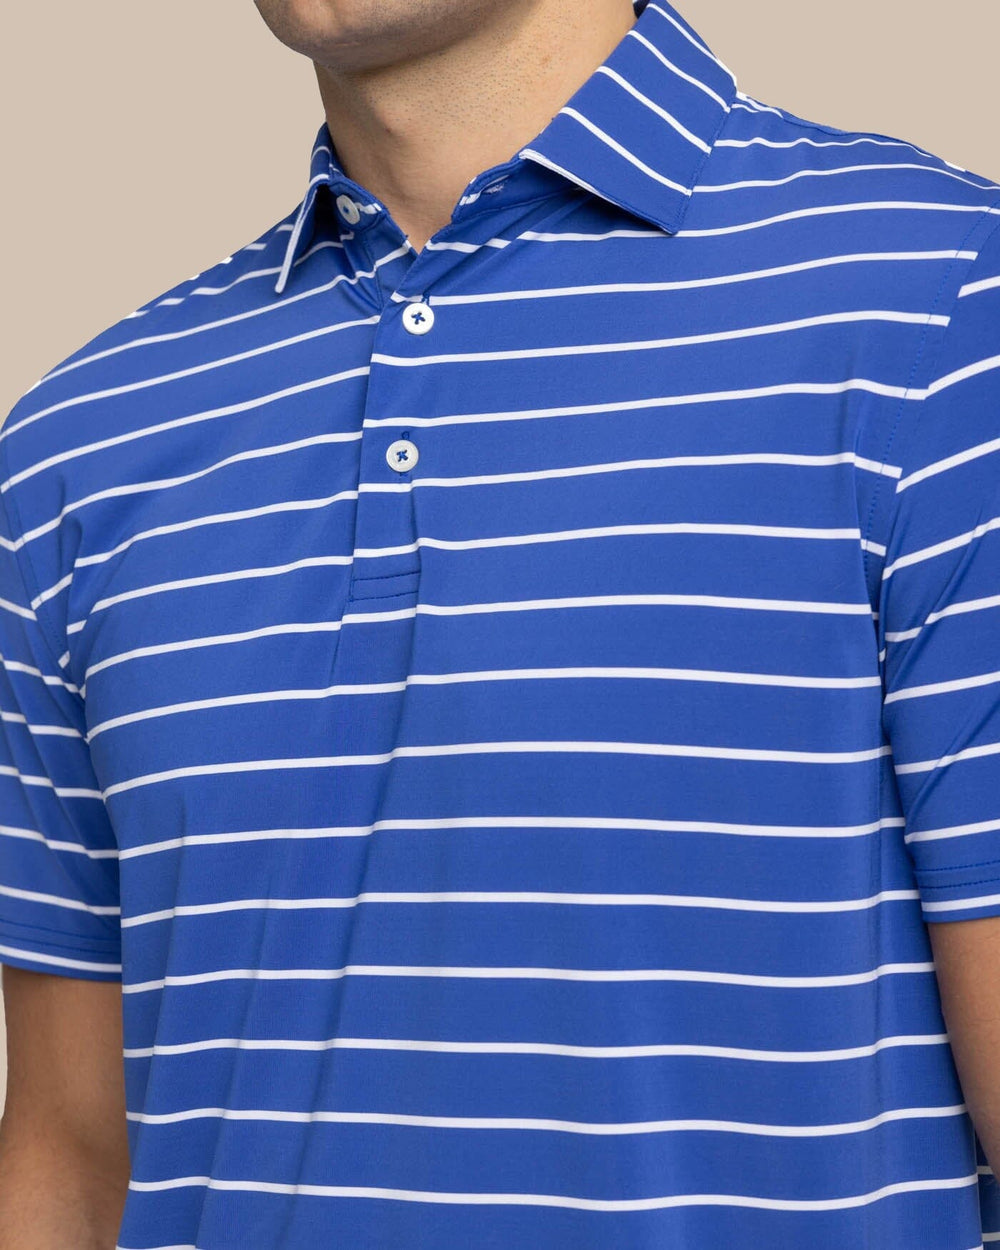 The detail view of the Southern Tide brrr-eeze Desmond Stripe Performance Polo by Southern Tide - University Blue